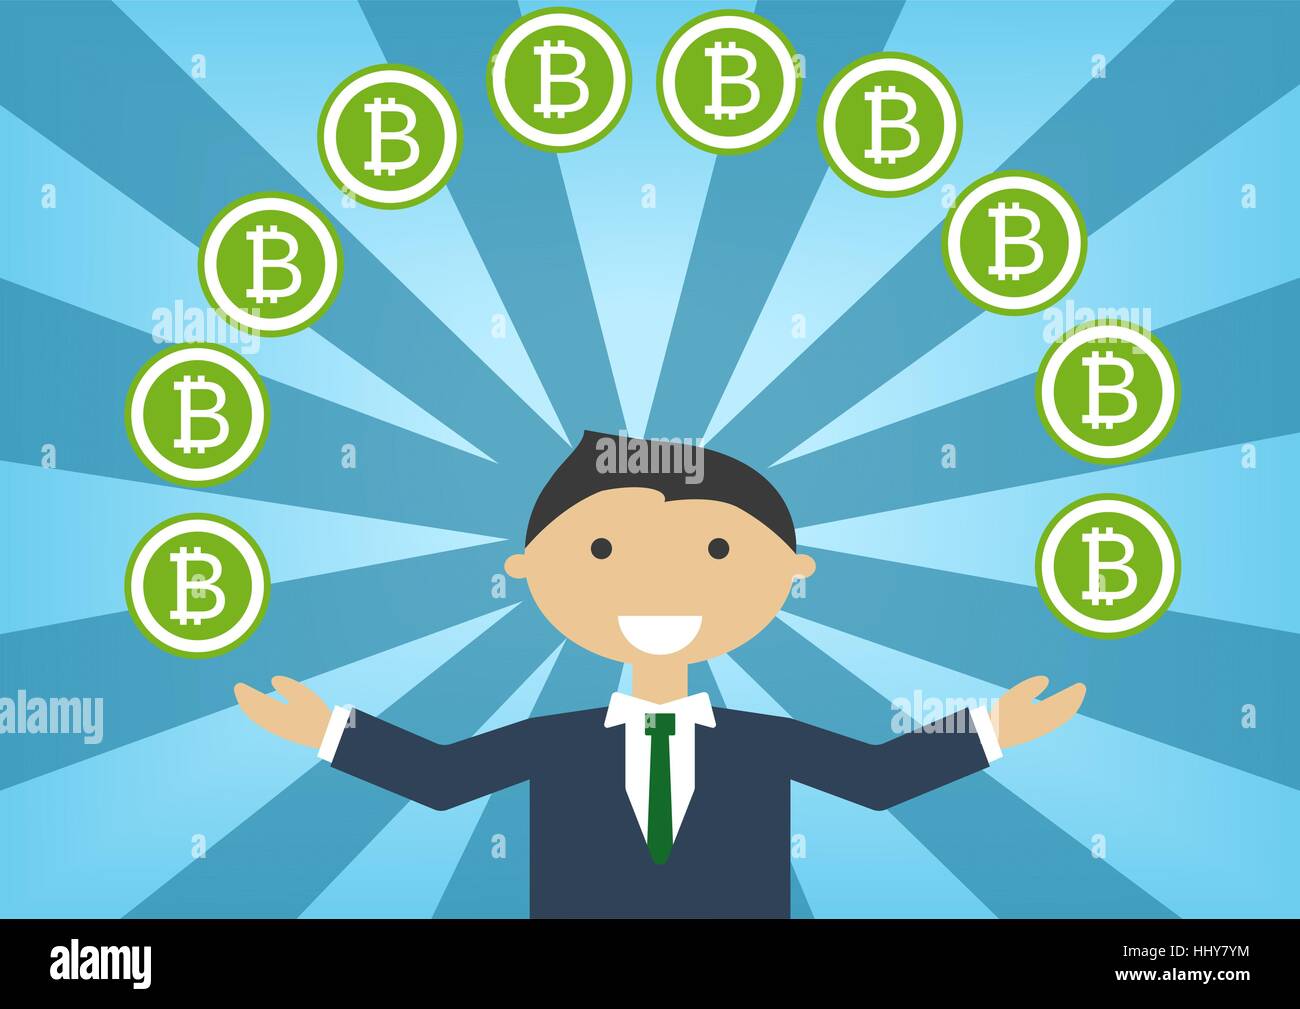 Bitcoin millionaire vector illustration as example for success in technology industry Stock Vector